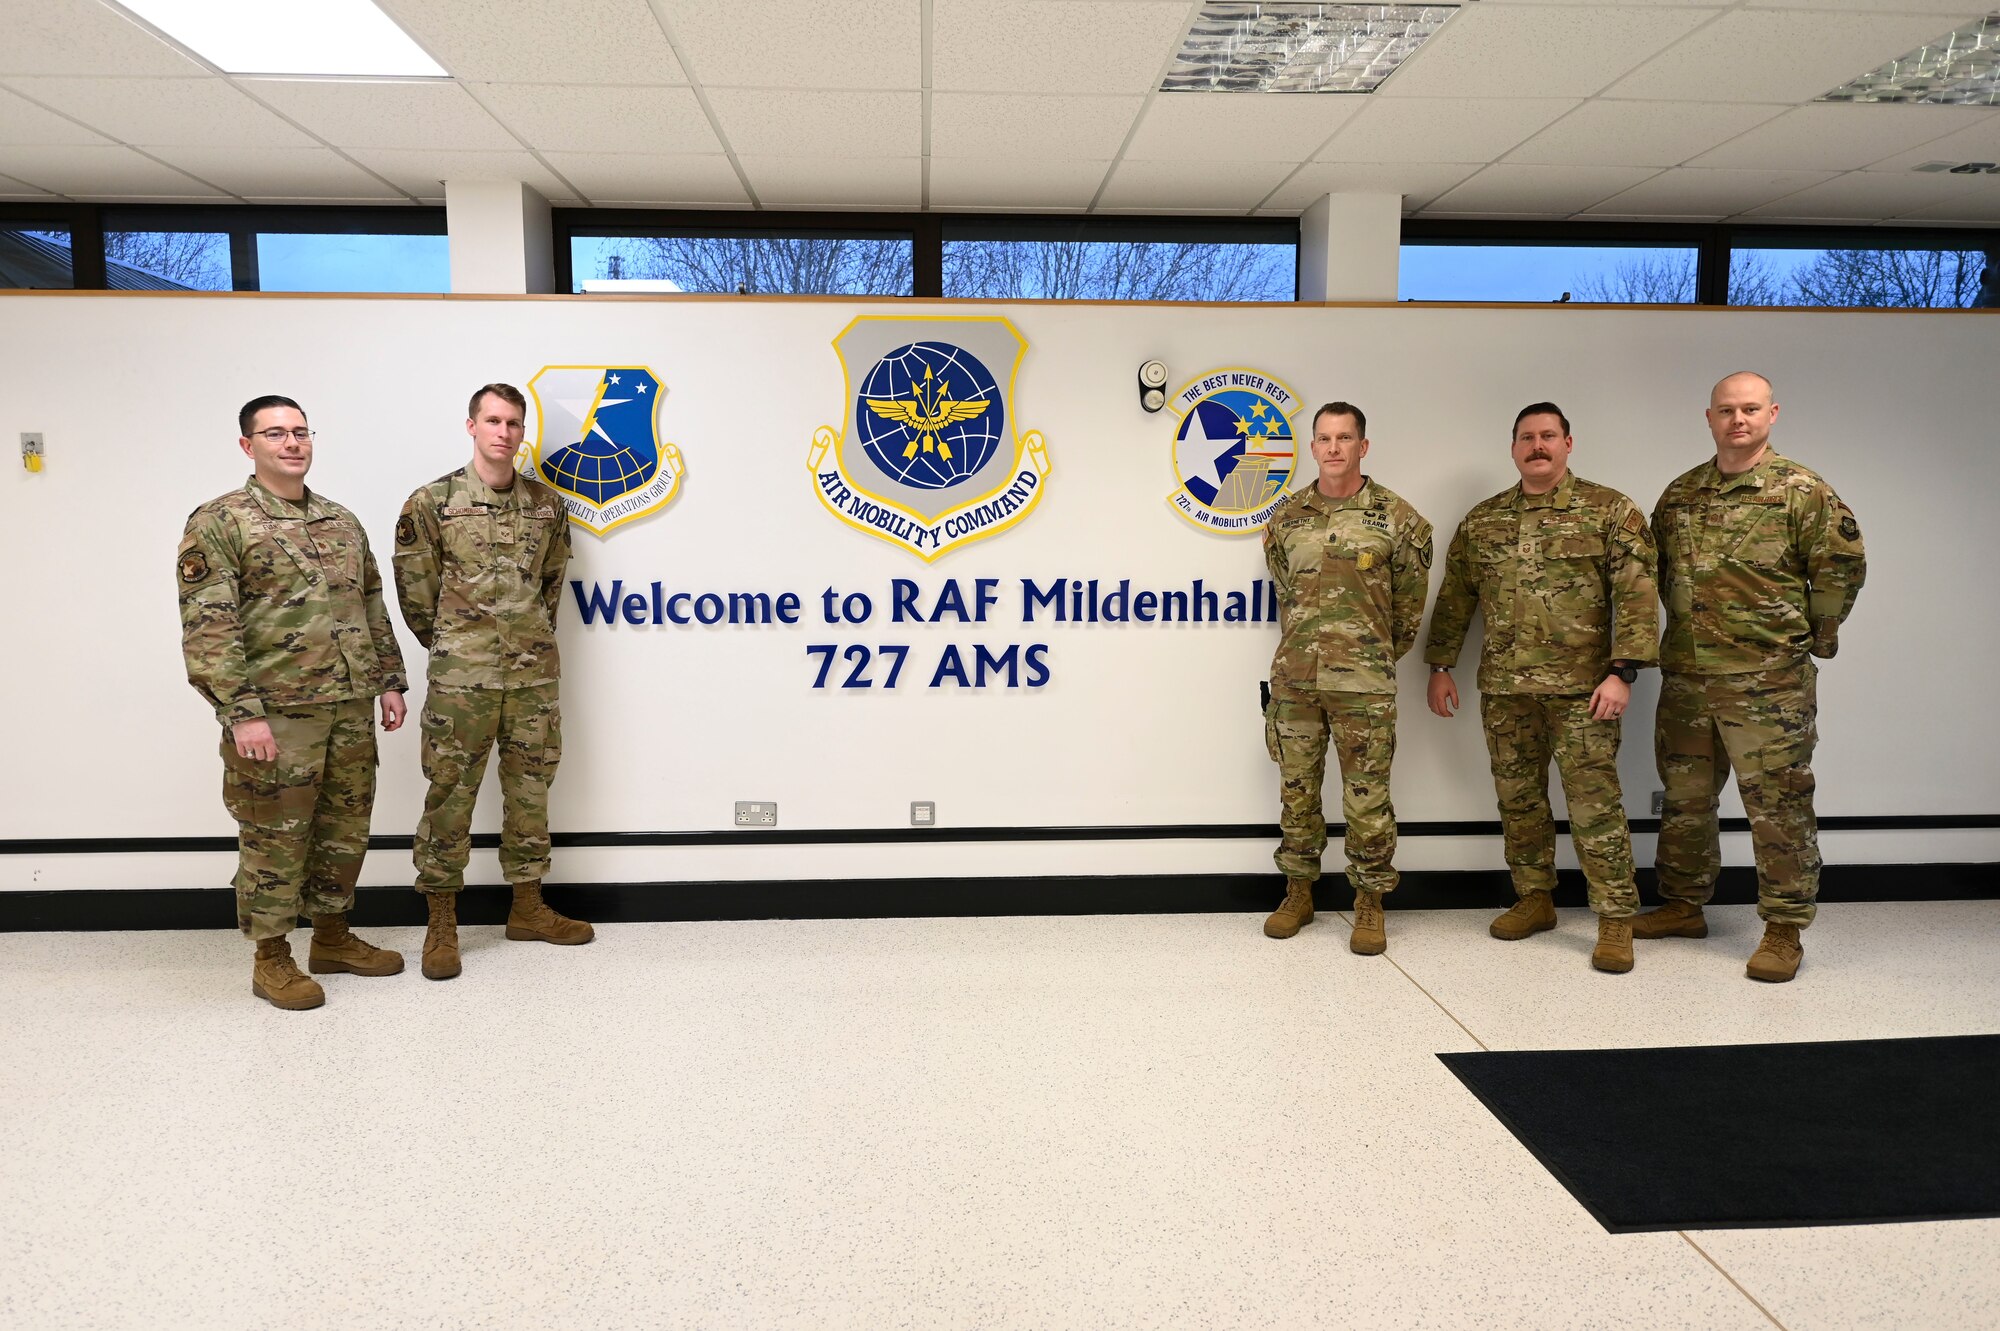 Abernethy was introduced to the Air Mobility Command services offered to travelers on official duty and their families through the Patriot Express.